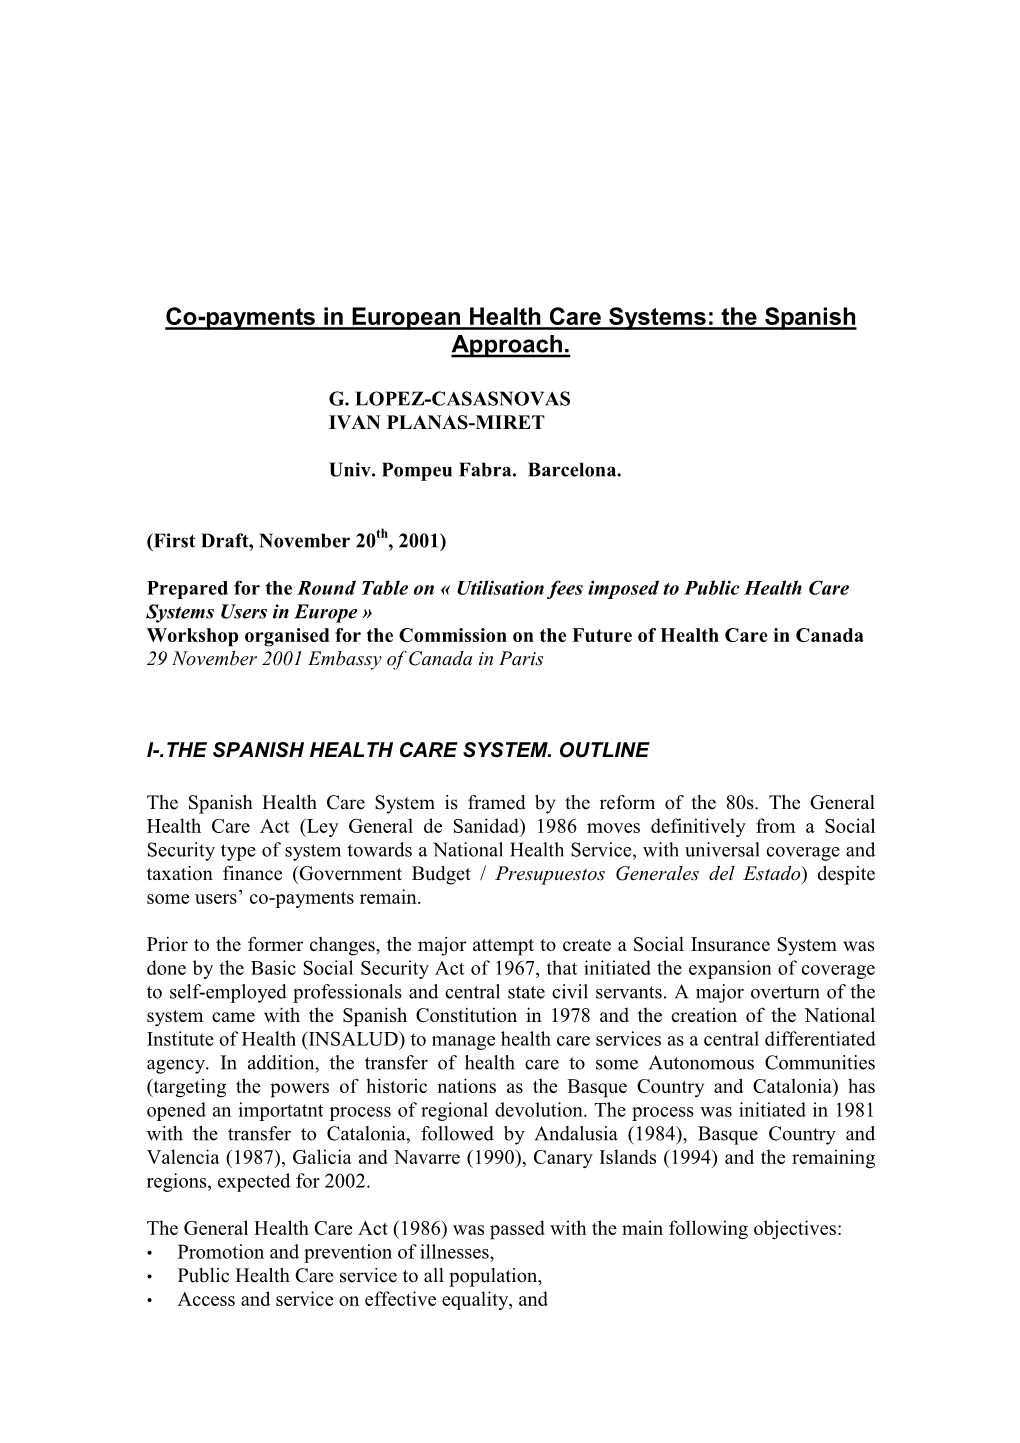 Co-Payments in European Health Care Systems: the Spanish Approach